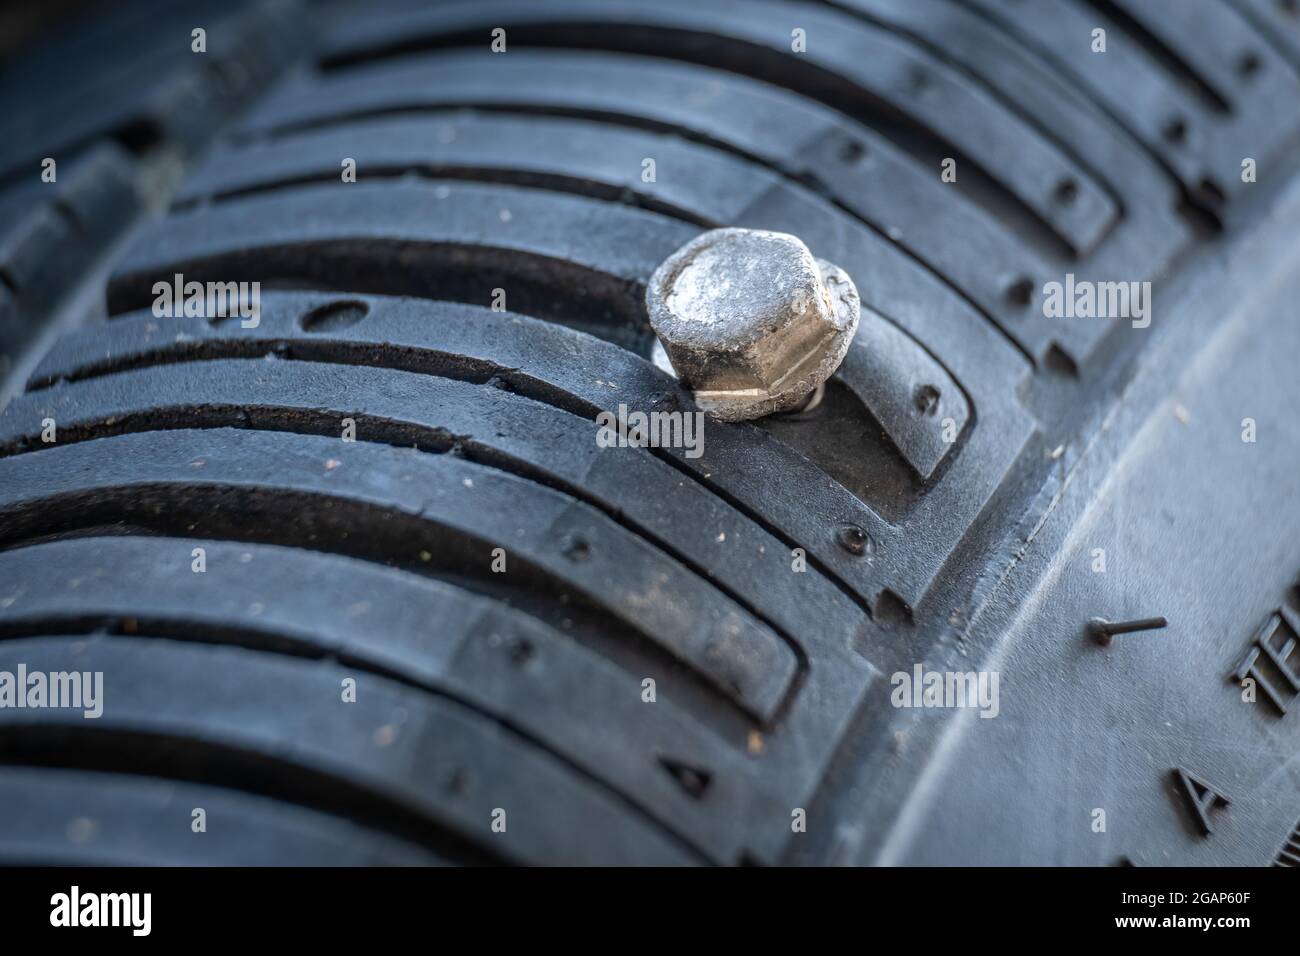 A screw has punctured a car tire at the edge of the tread near the sidewall, rendering the tire irrepairable. Stock Photo